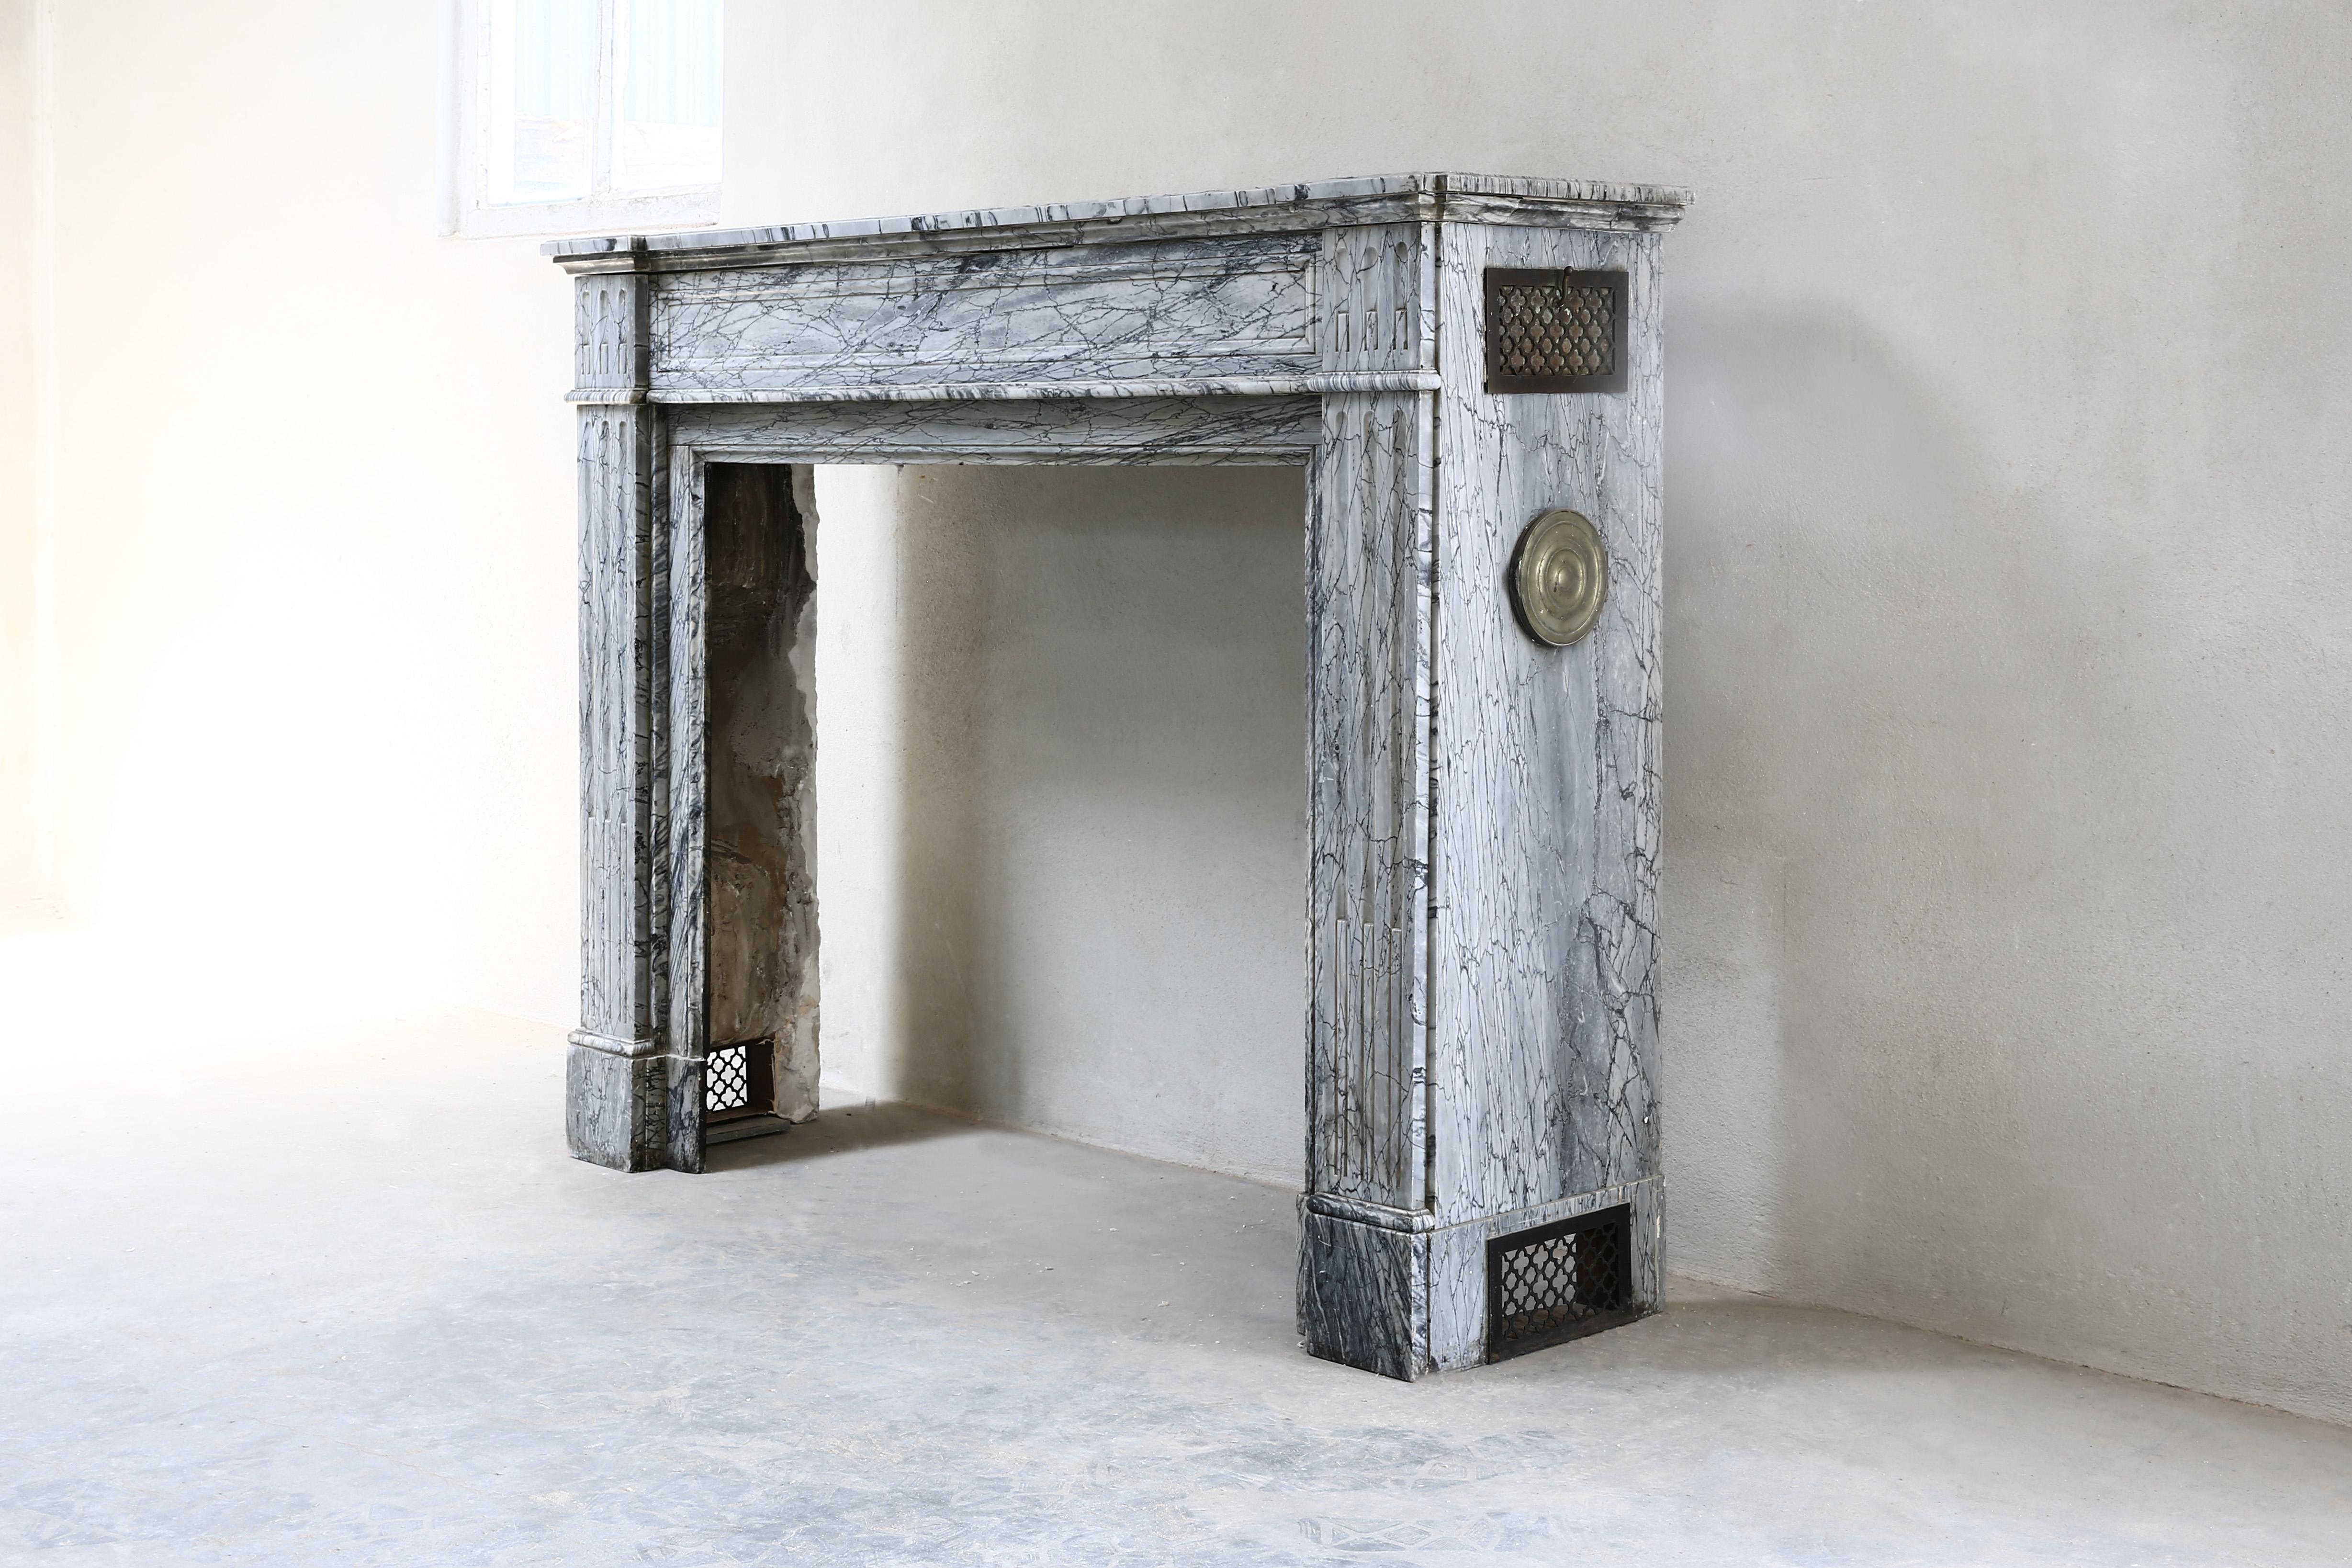 Beautiful antique fireplace of Blue Fleuri marble from the 19th century. This fireplace is in Louis XVI style and has straight shapes. Blue Fleuri marble is a type of marble that was widely used for fireplaces from the 19th century. Nice to mention